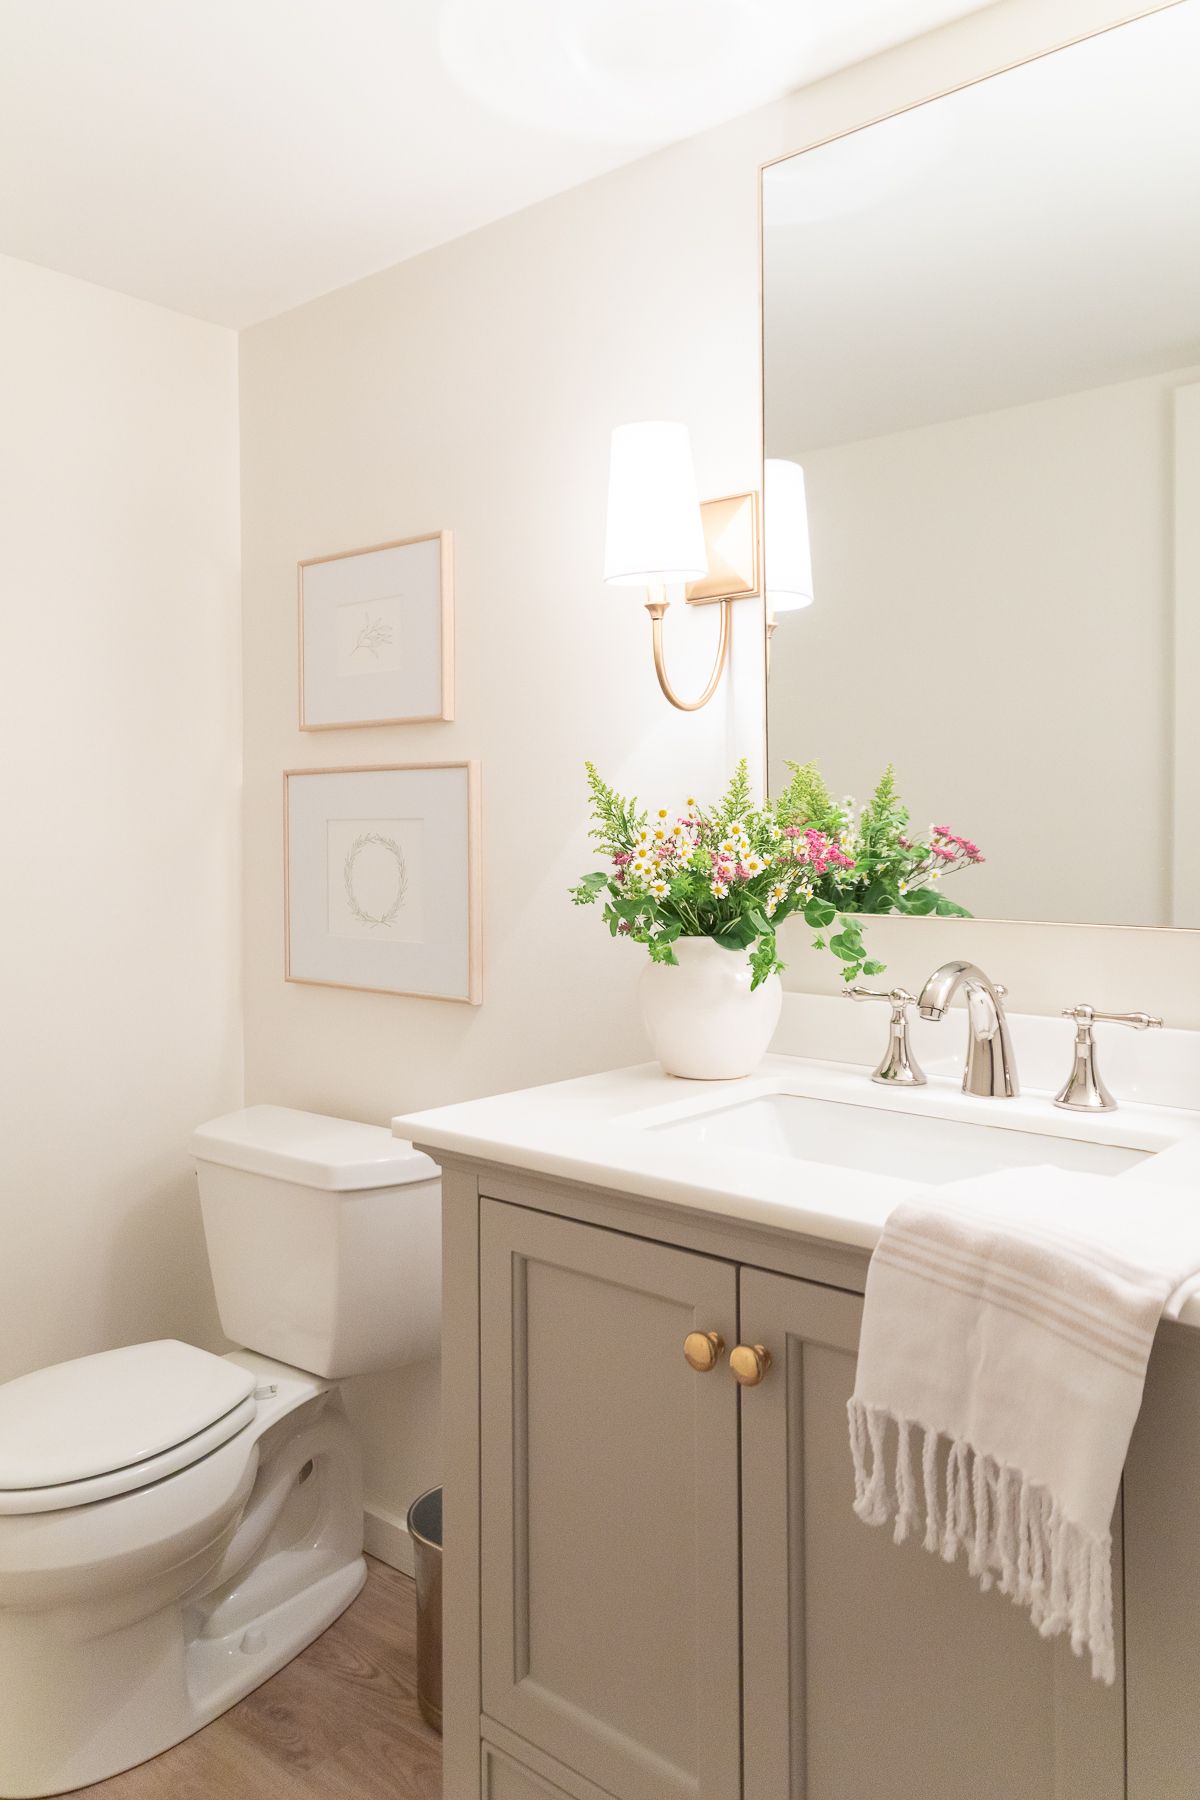 A bathroom with creamy walls and a greige vanity with wall sconces for a cozy feel TeamJiX